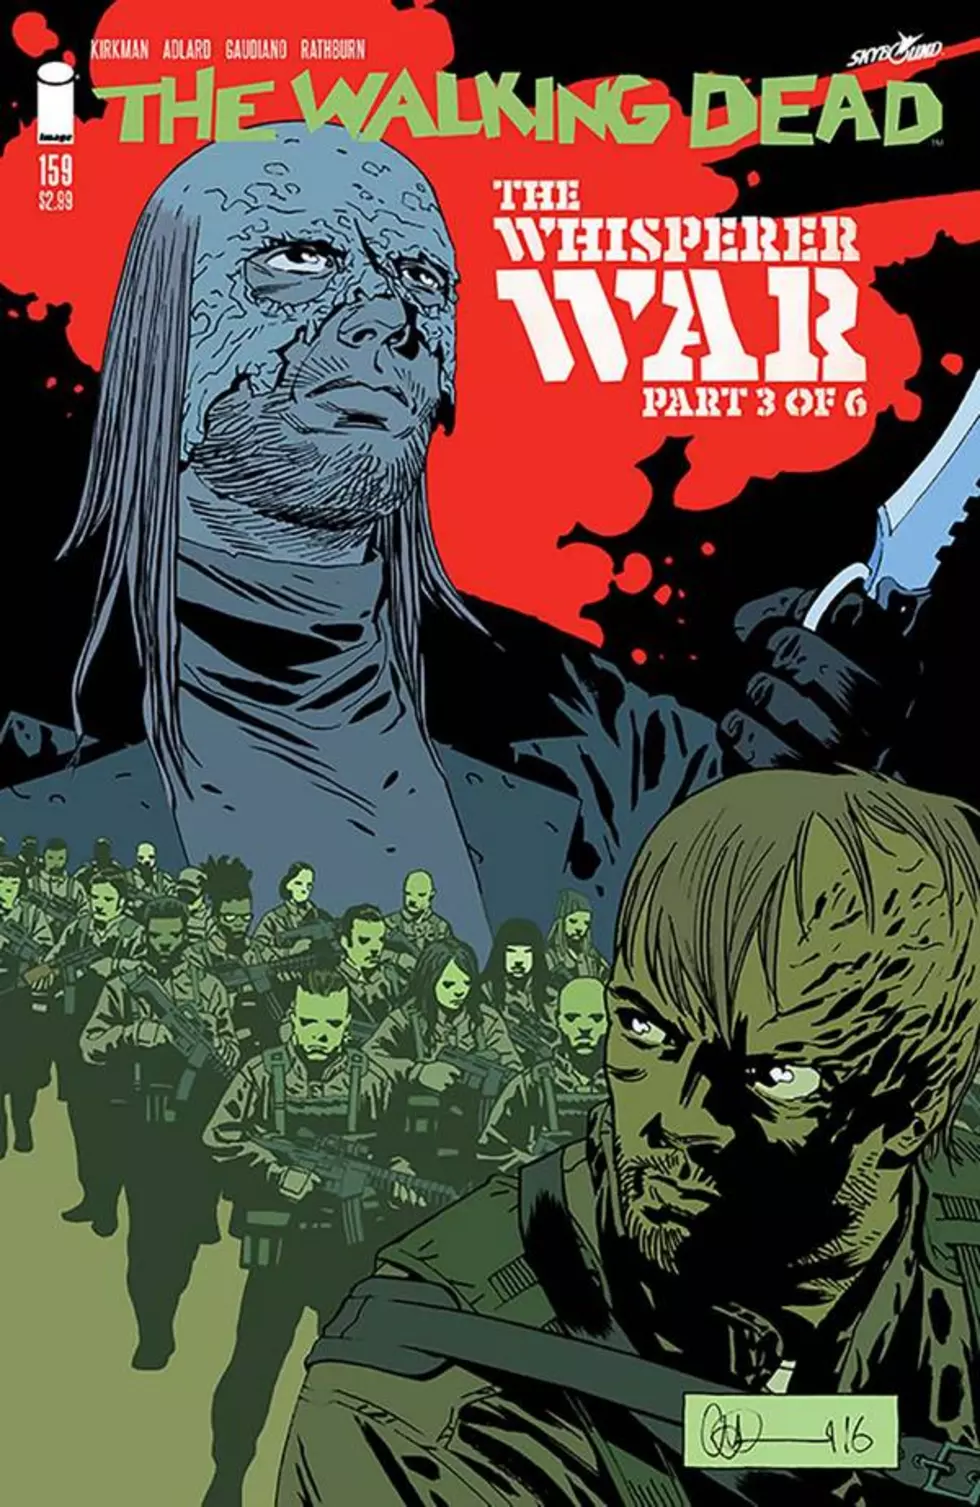 Gavin and Rob Review The Walking Dead Issue 159!